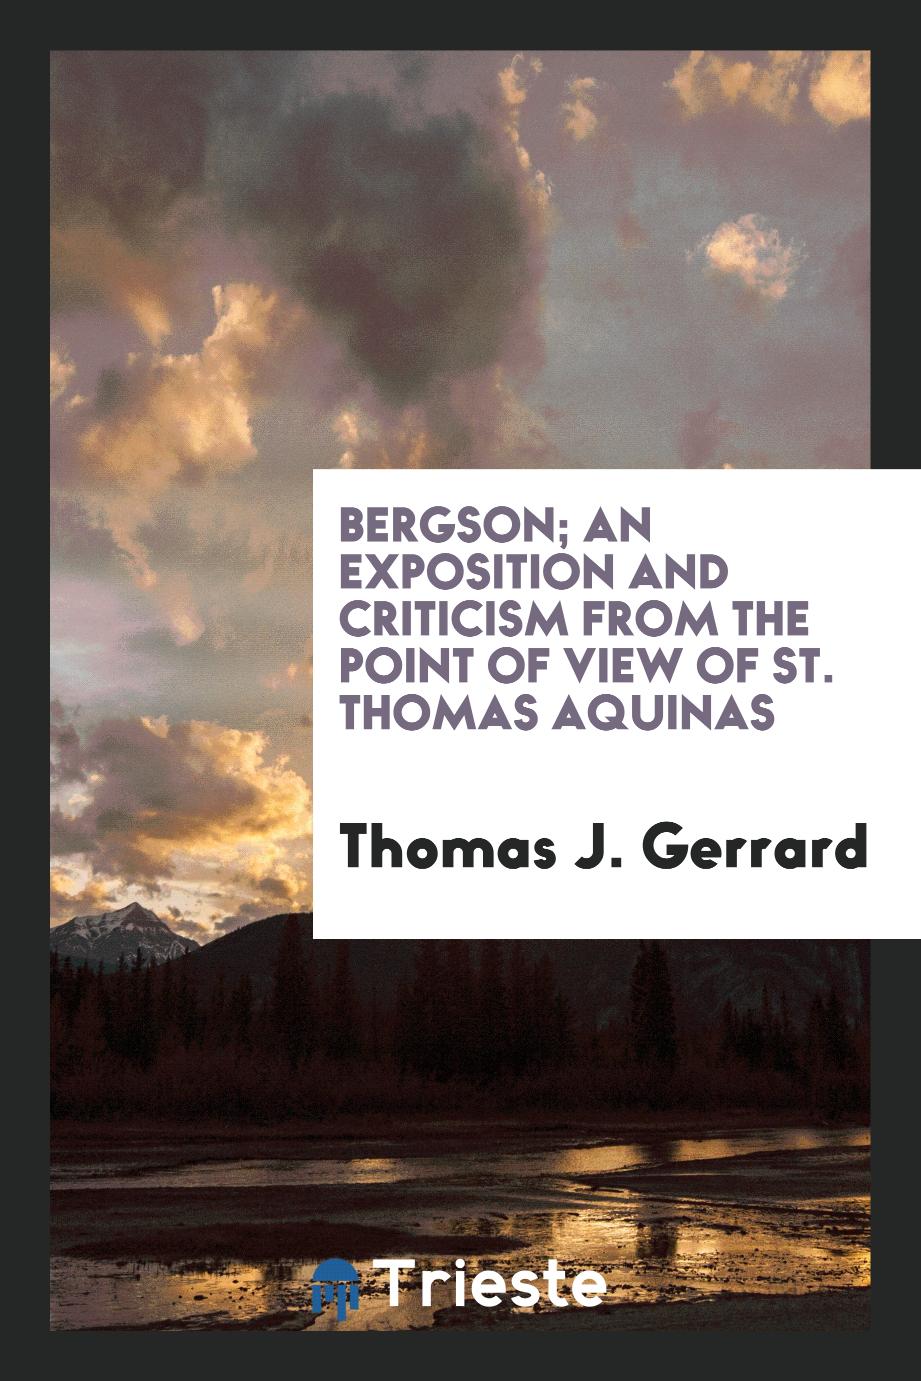 Bergson; an exposition and criticism from the point of view of St. Thomas Aquinas